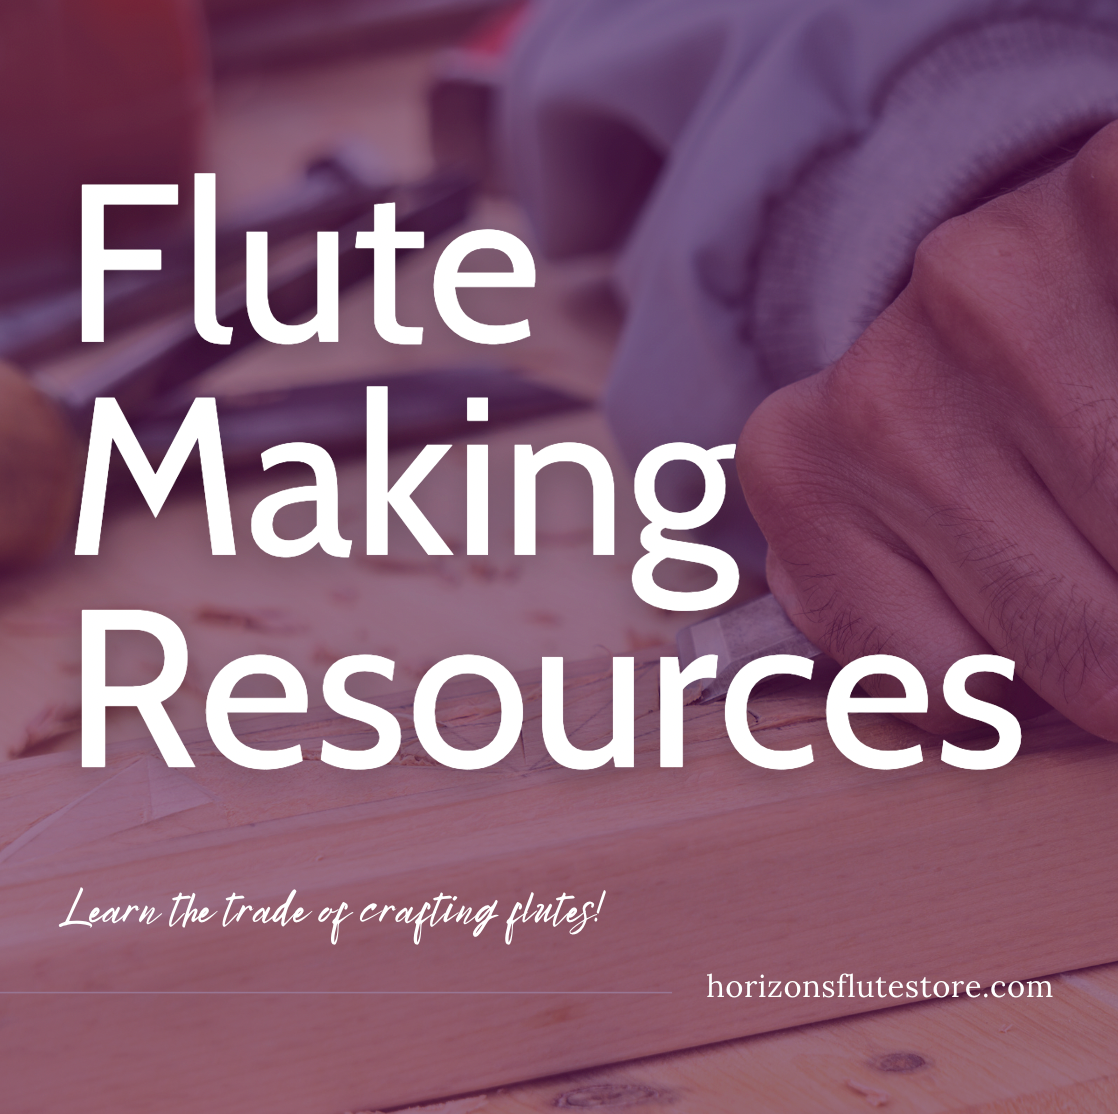 Flute Making Resources